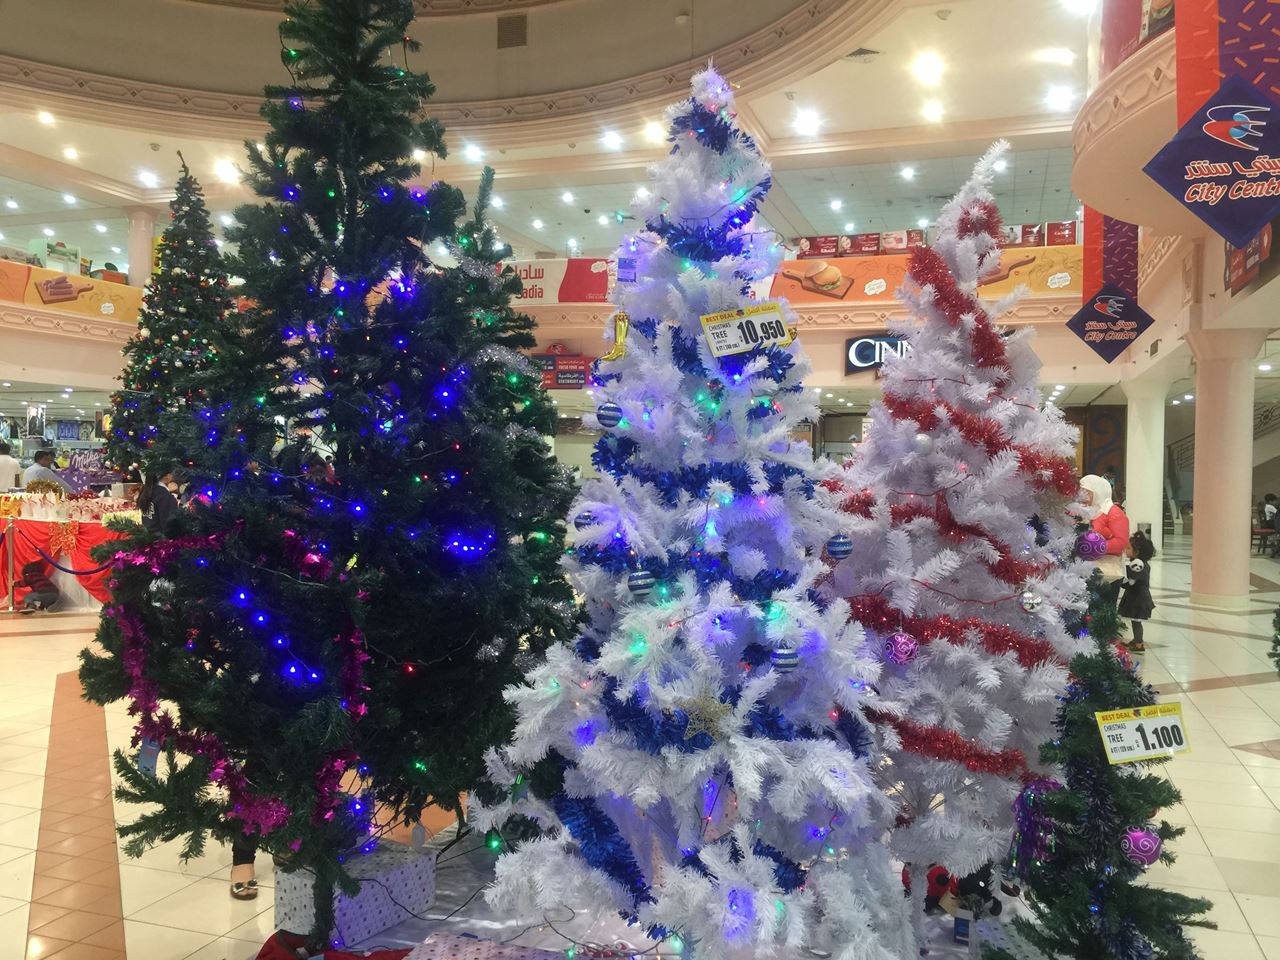 Christmas trees with different colors and sizes